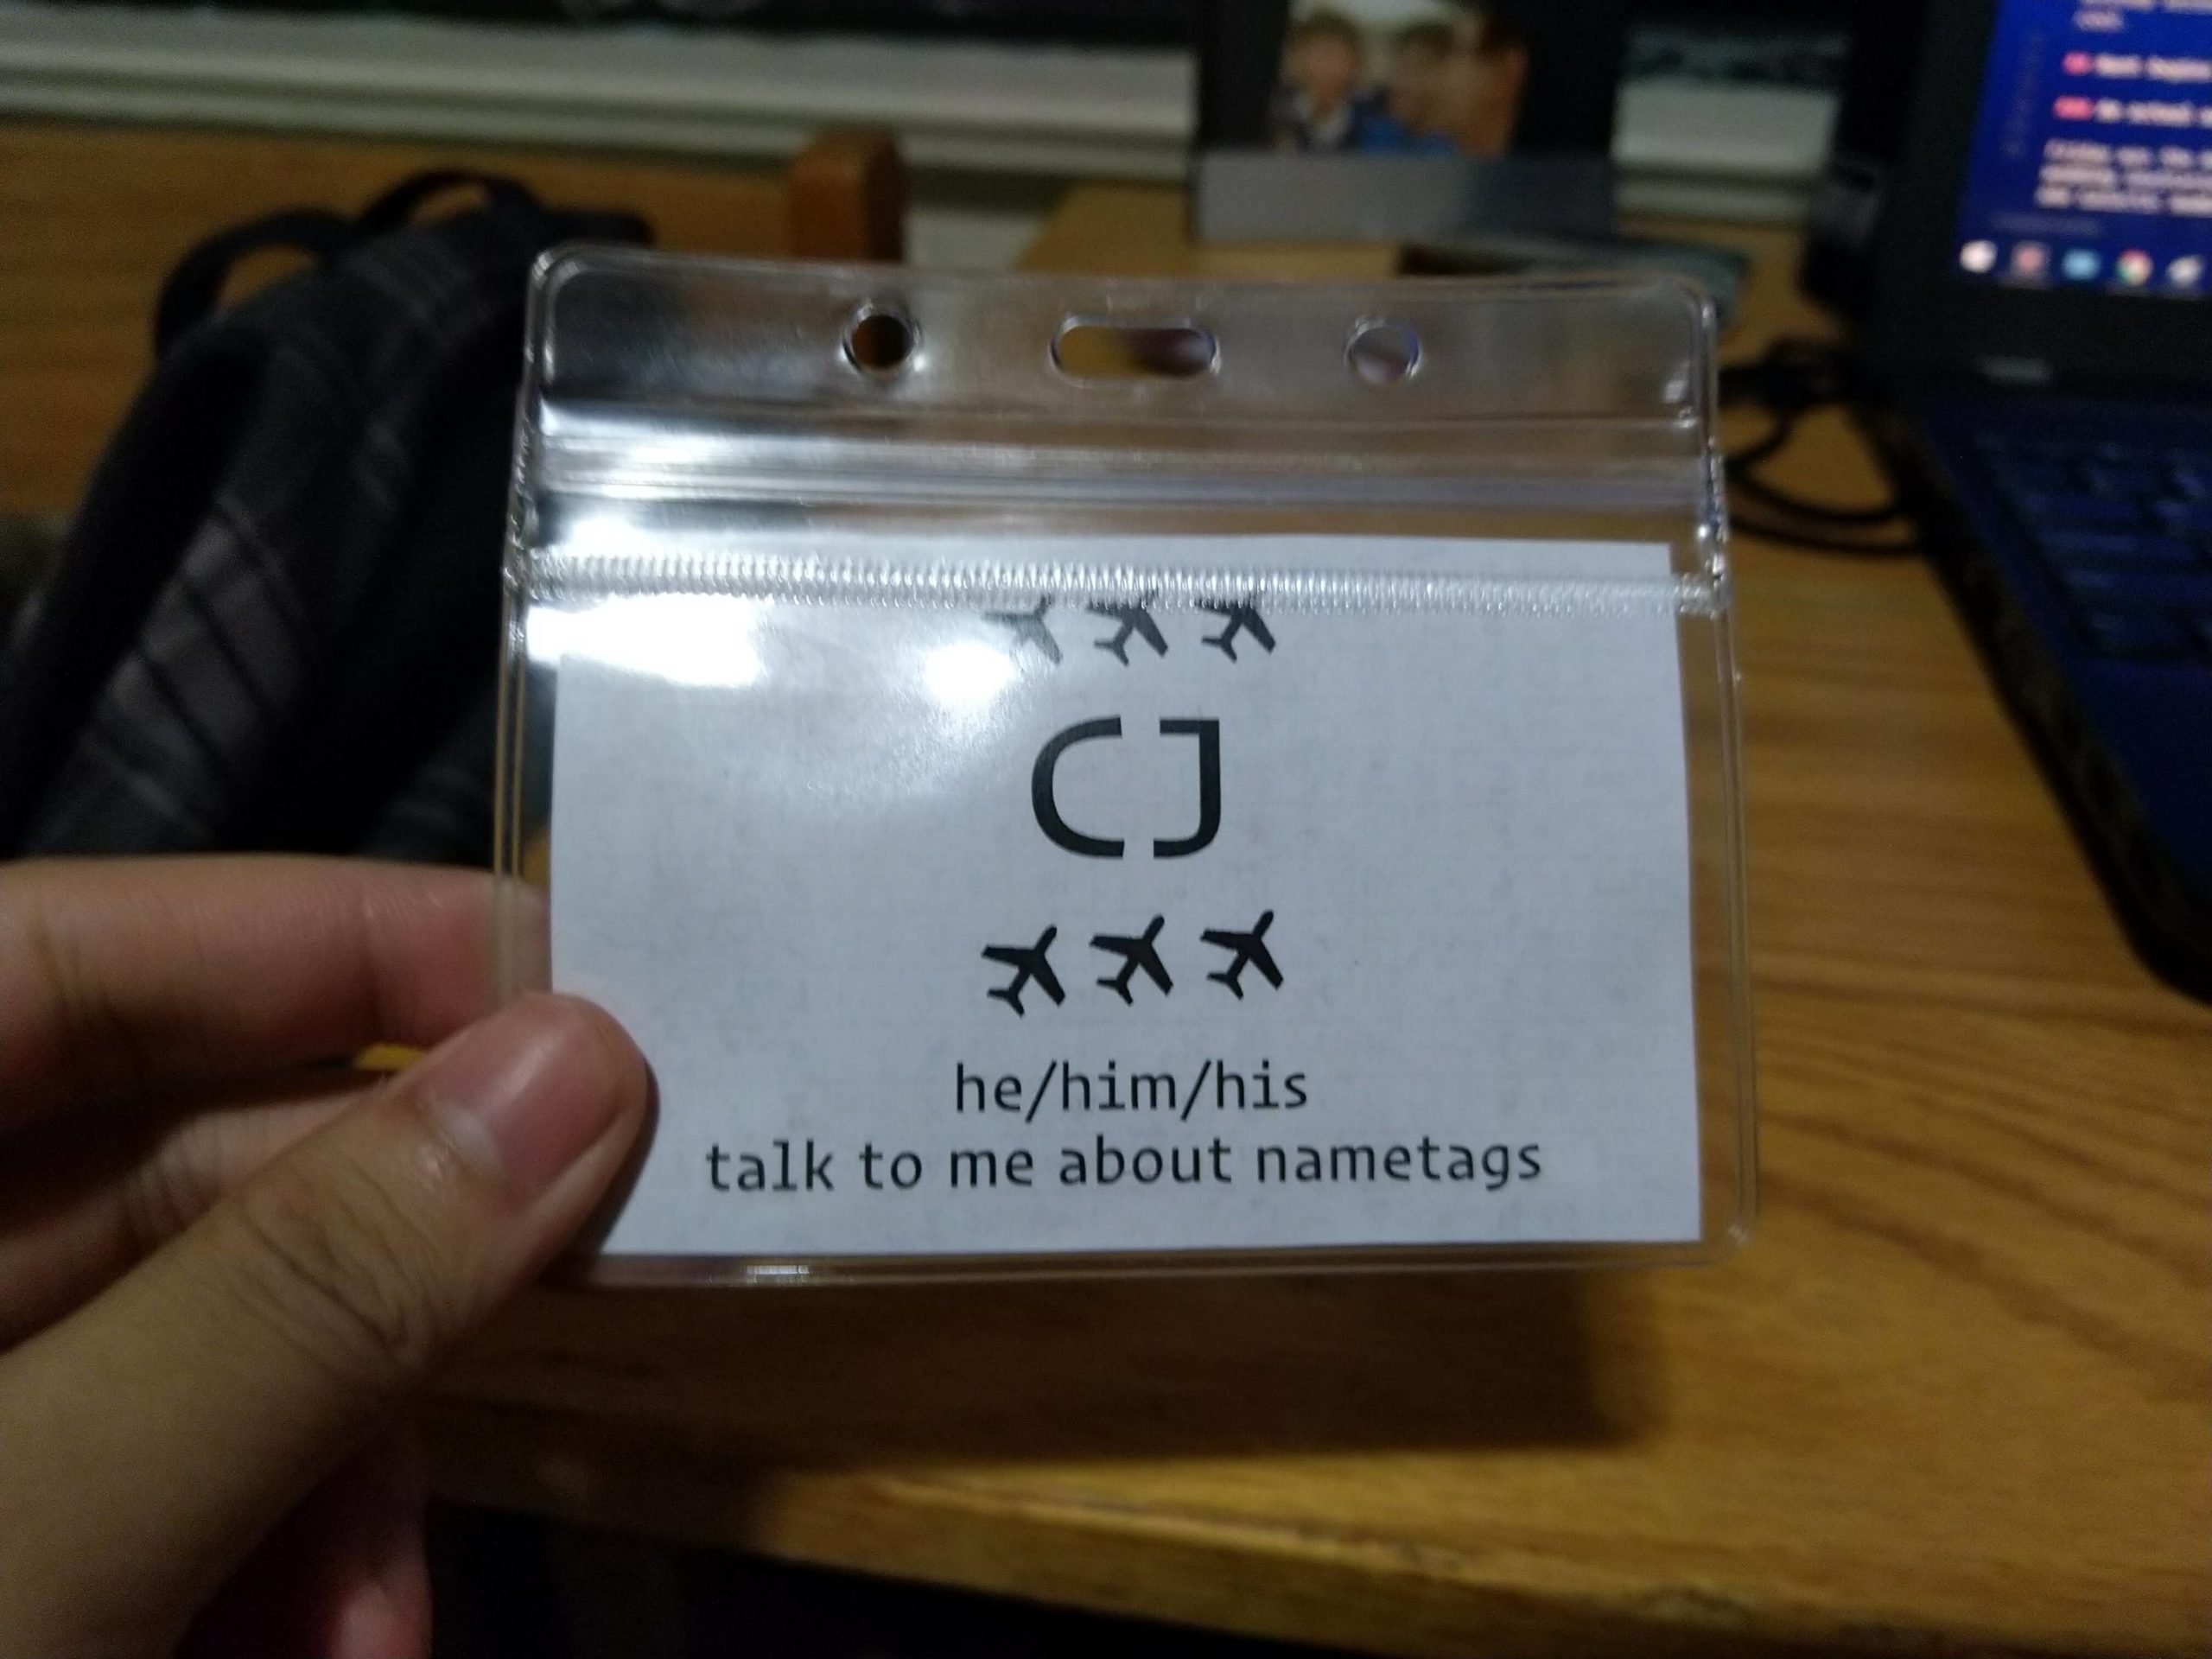 nametag; has three planes, CJ, he/him/his, and “talk to me about nametags”